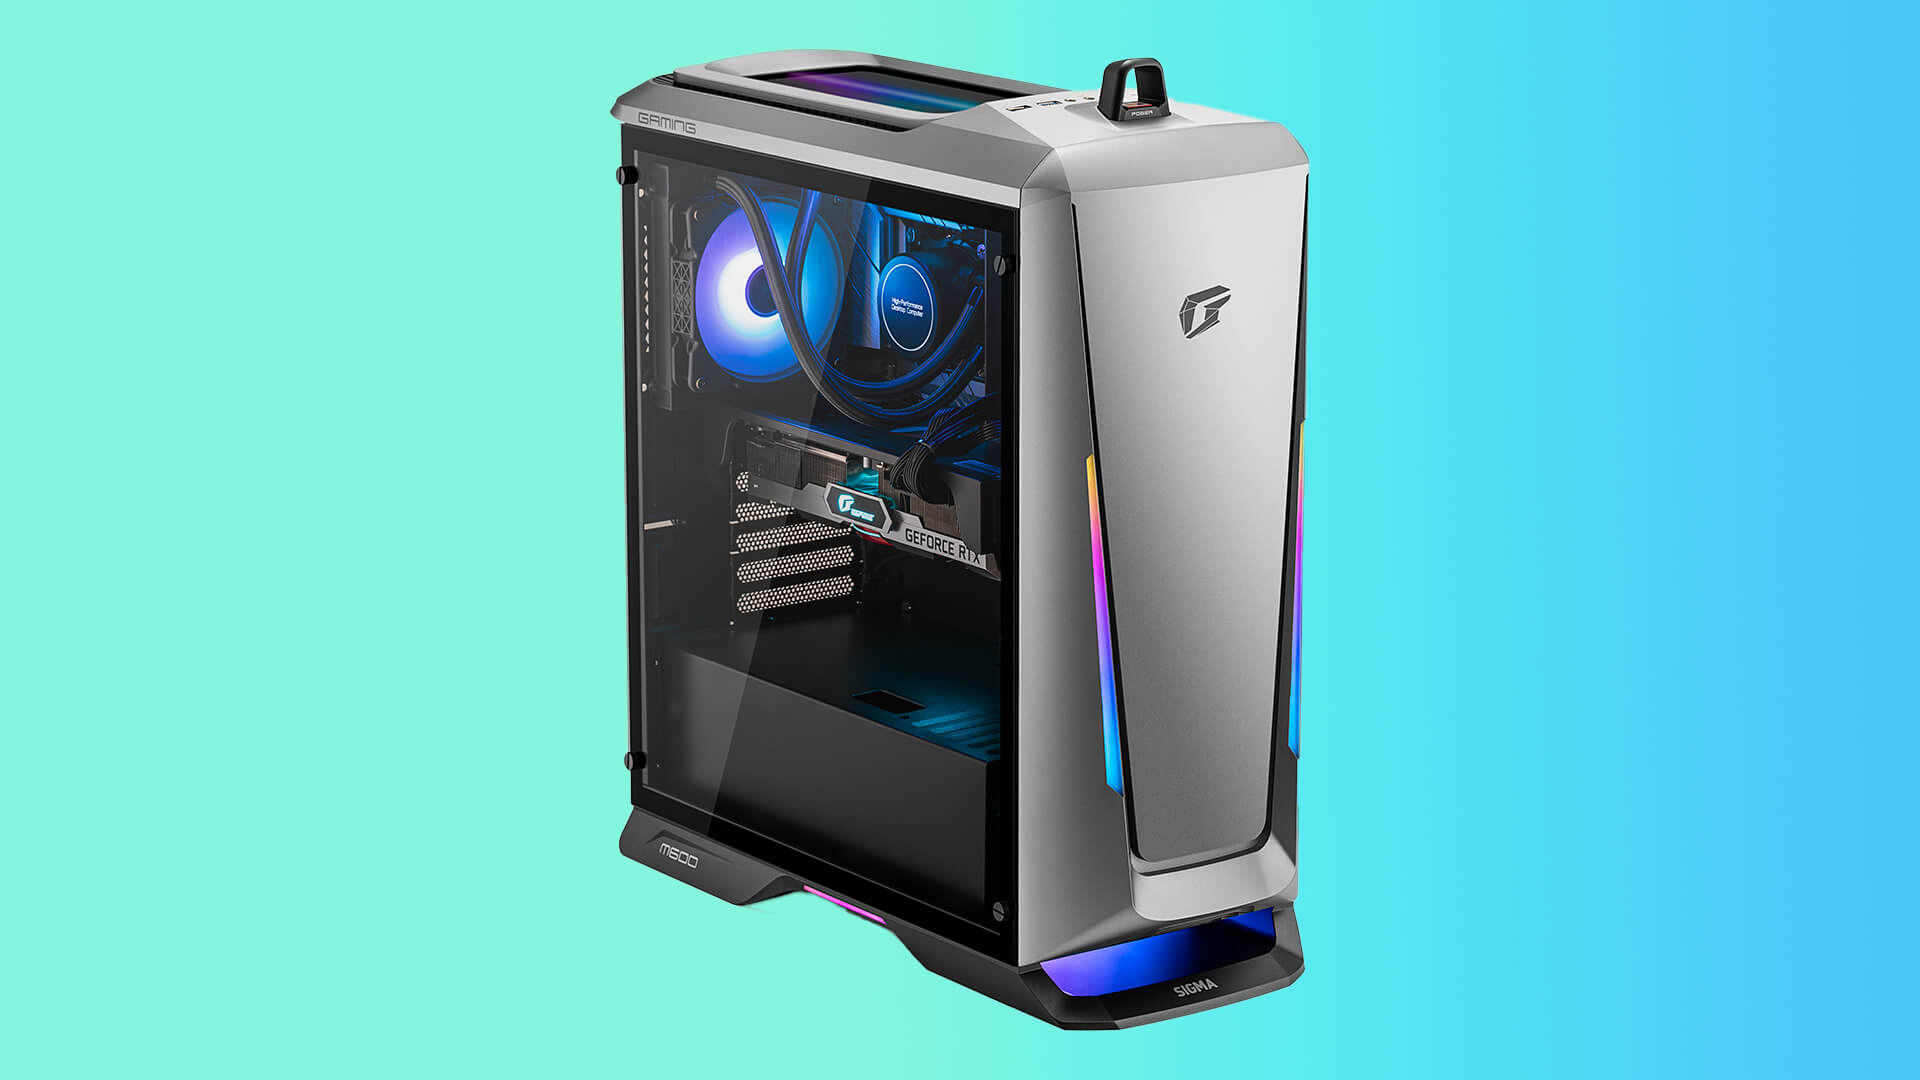 Colorful iGame M600 Mirage Gaming PC with RTX 3000 GPU Launched in India: Price, Specs